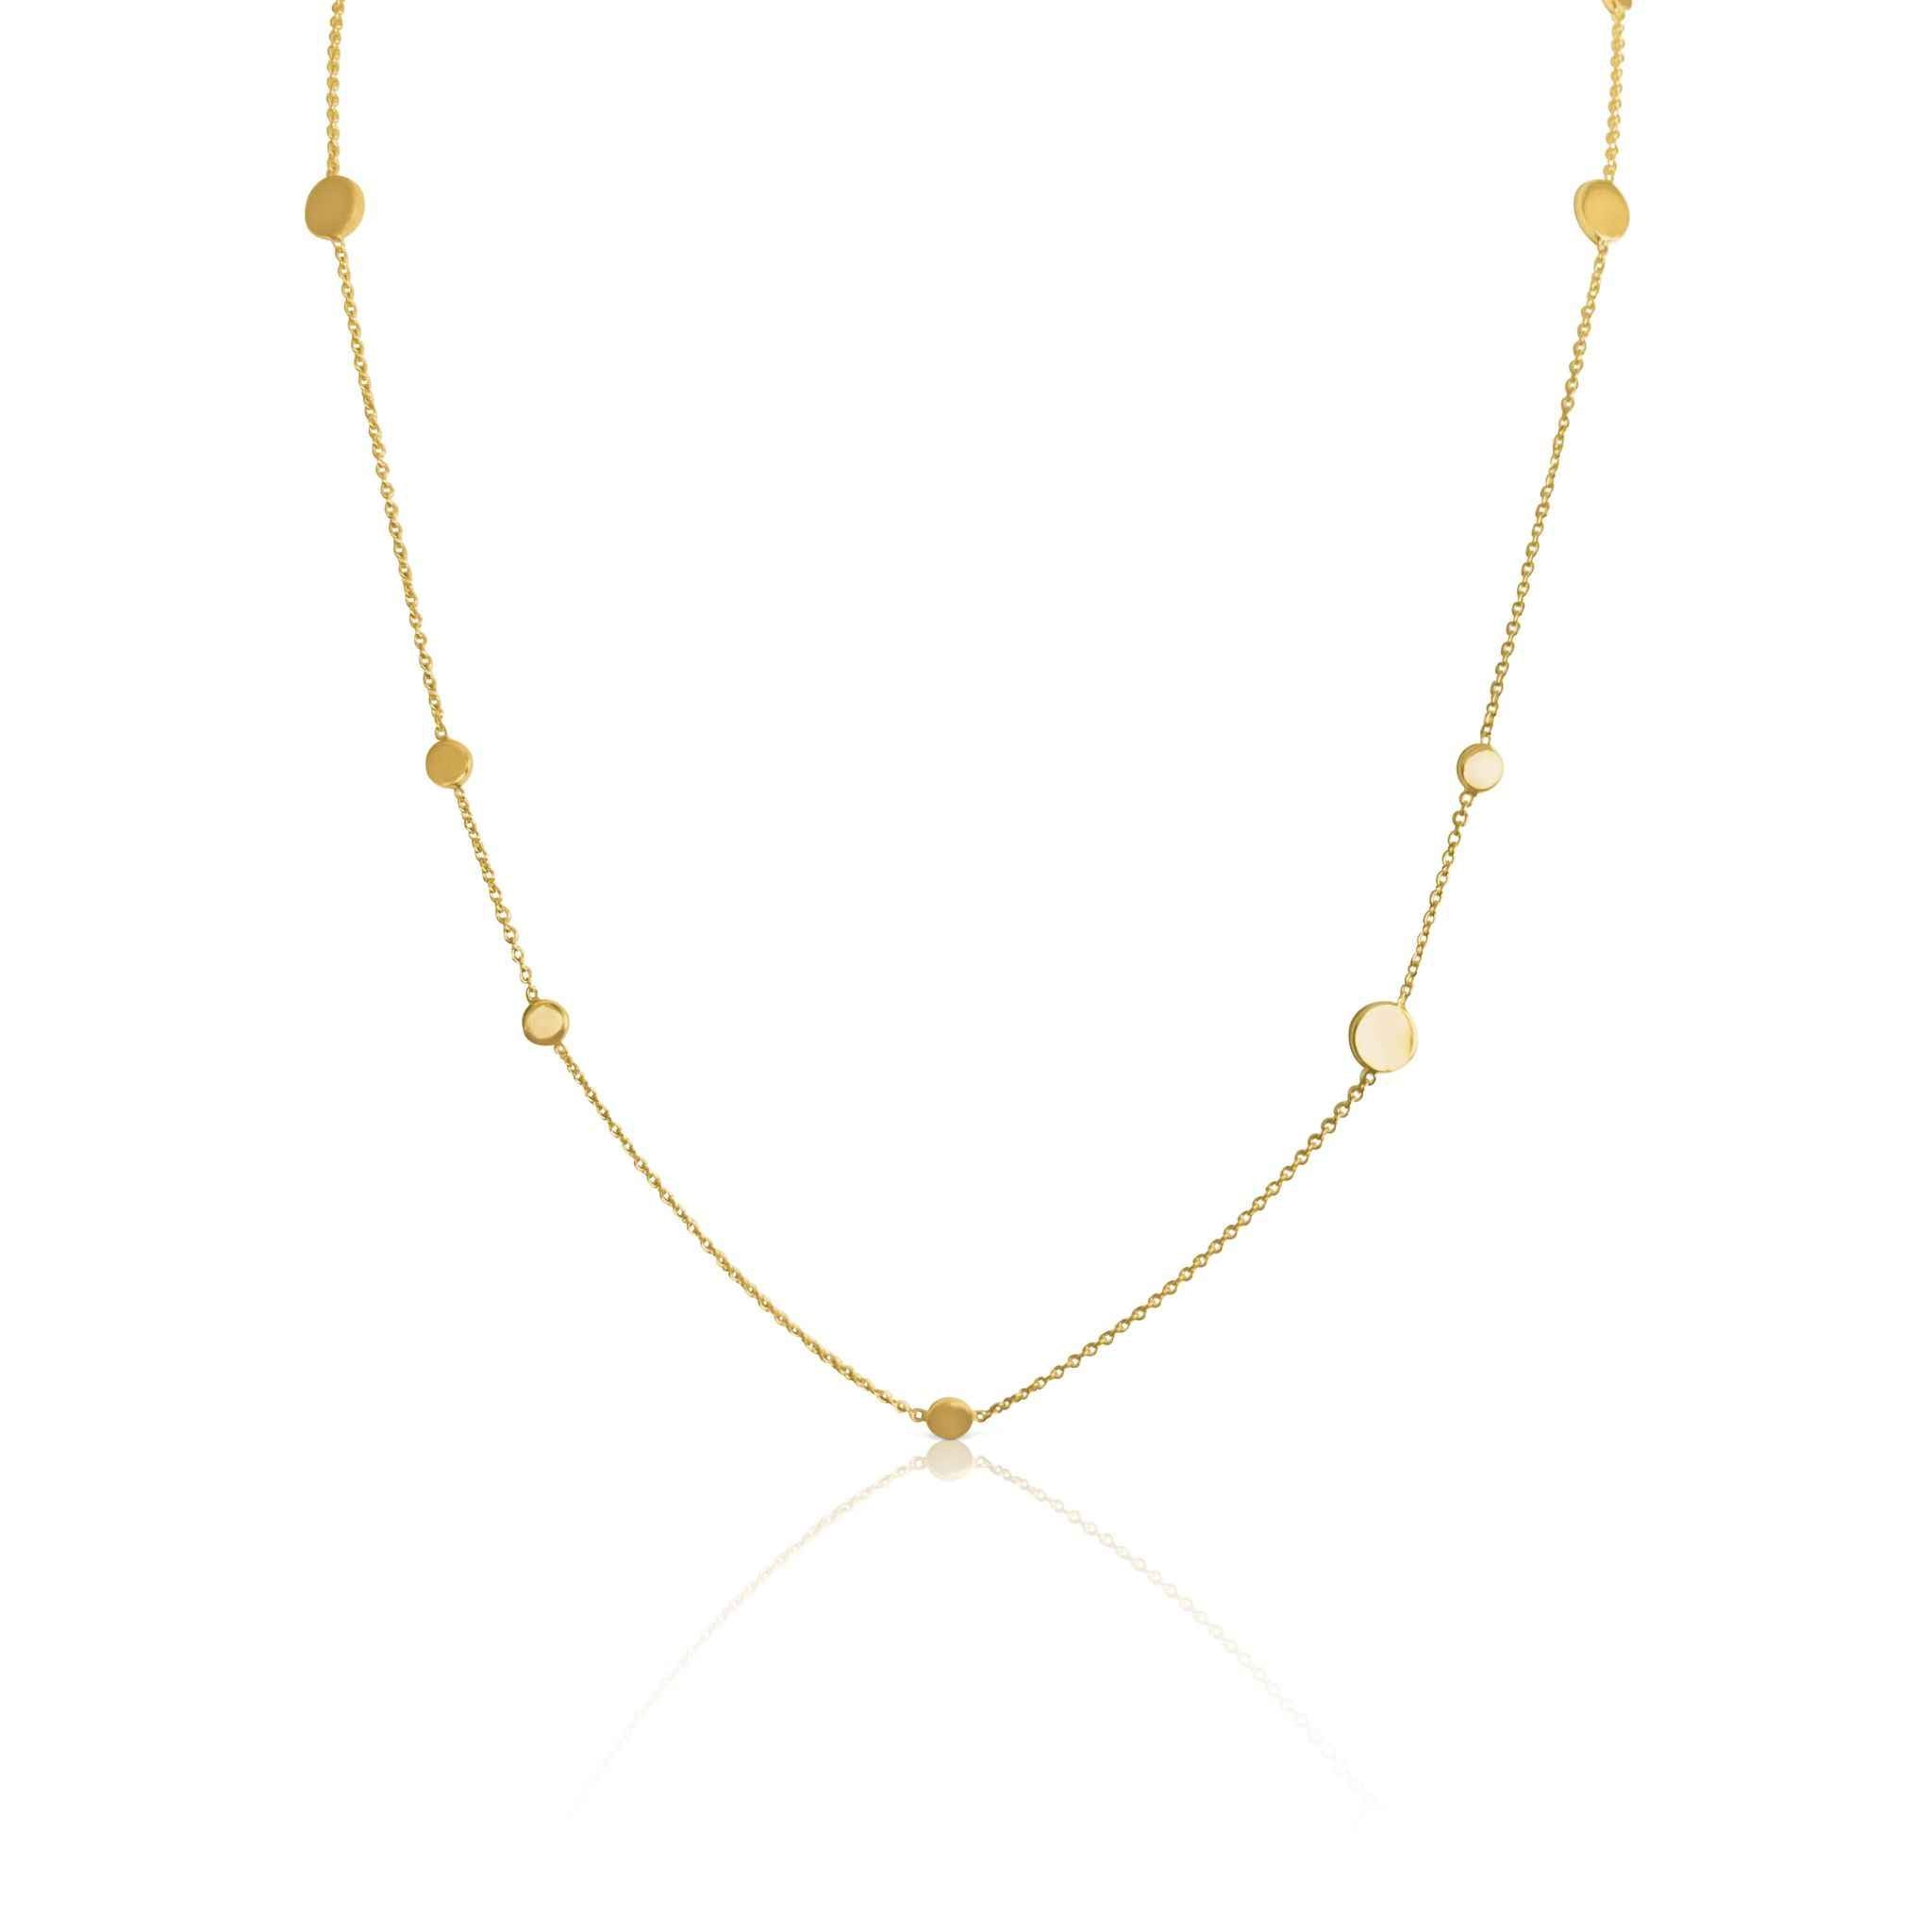 Elegant opera-length Pebble Necklace in Gold by Alessandra James, adorned with irregularly spaced round pebbles.